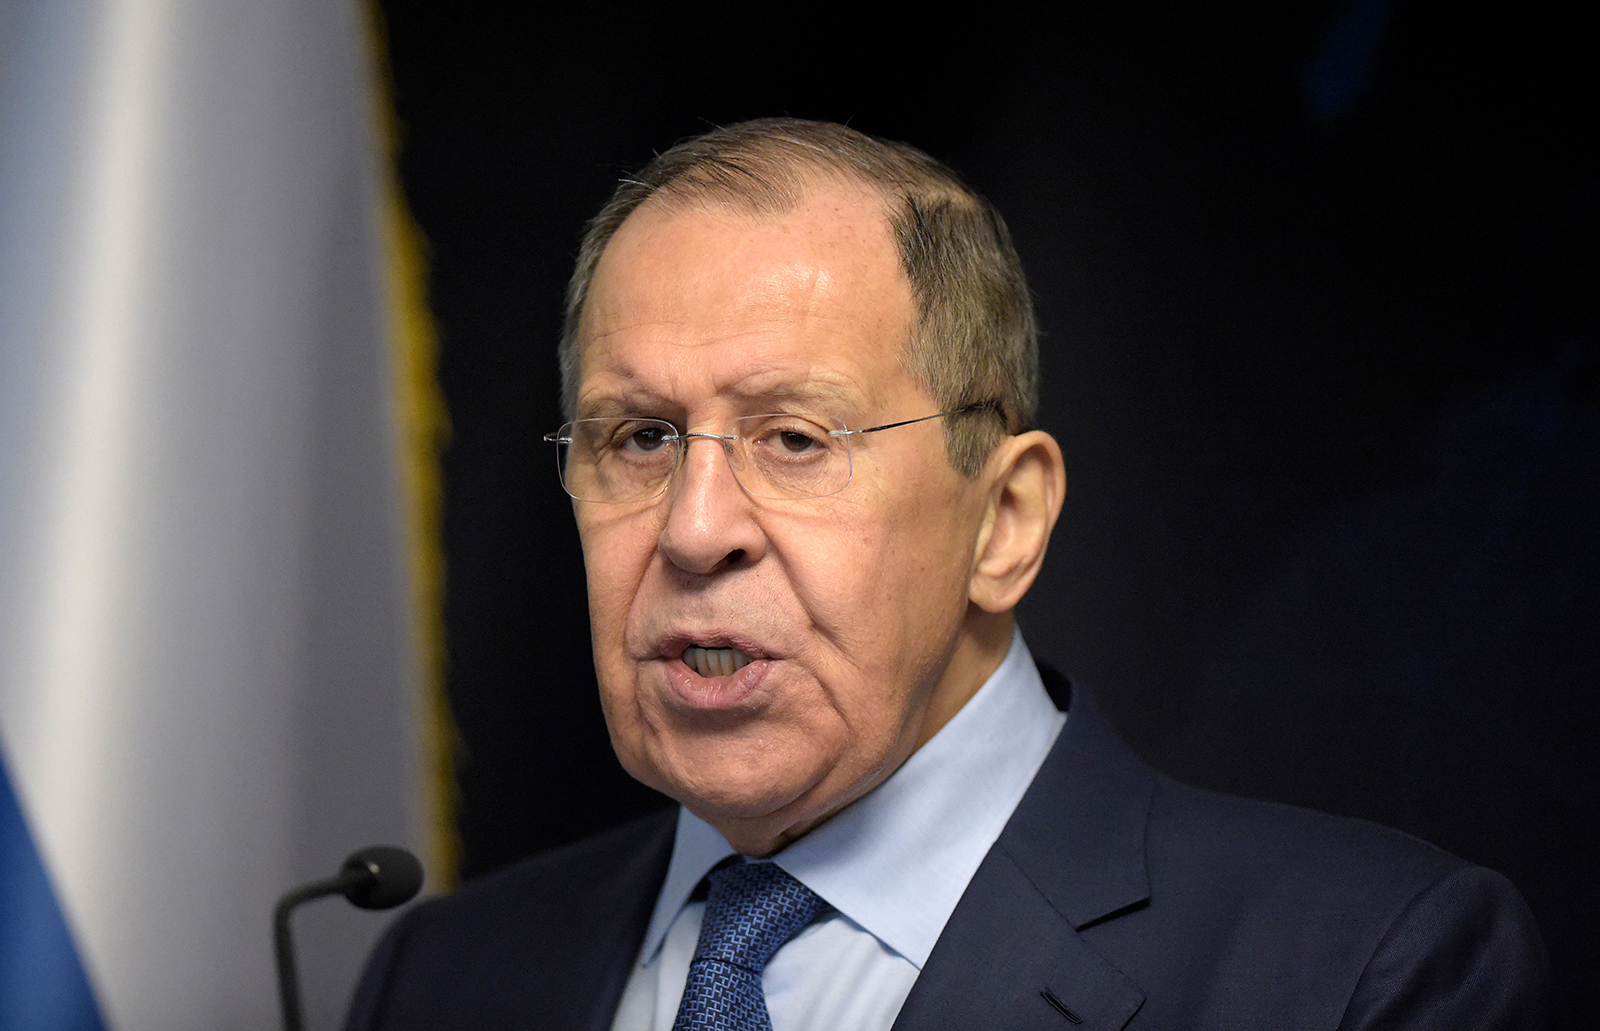 Russia's Foreign Minister Sergei Lavrov speaks during a joint news conference with Bahrain's Foreign Minister at the Bahraini Ministry of Foreign Affairs' headquarters in the capital Manama on May 31.